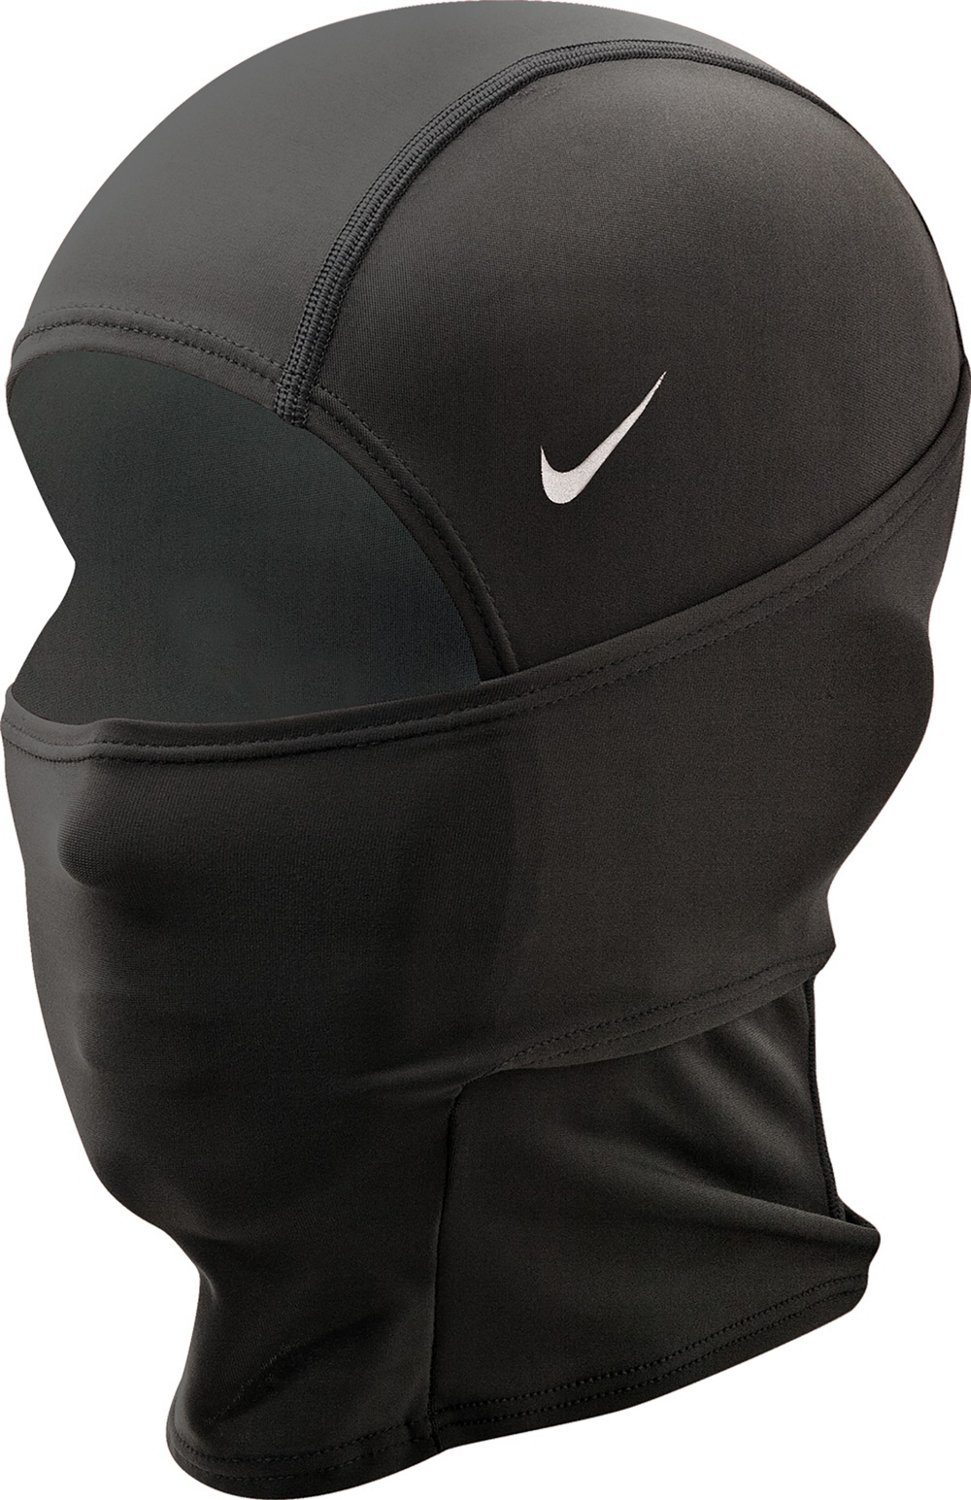 Nike Adults' PRO Hyperwarm Free Shipping at Academy